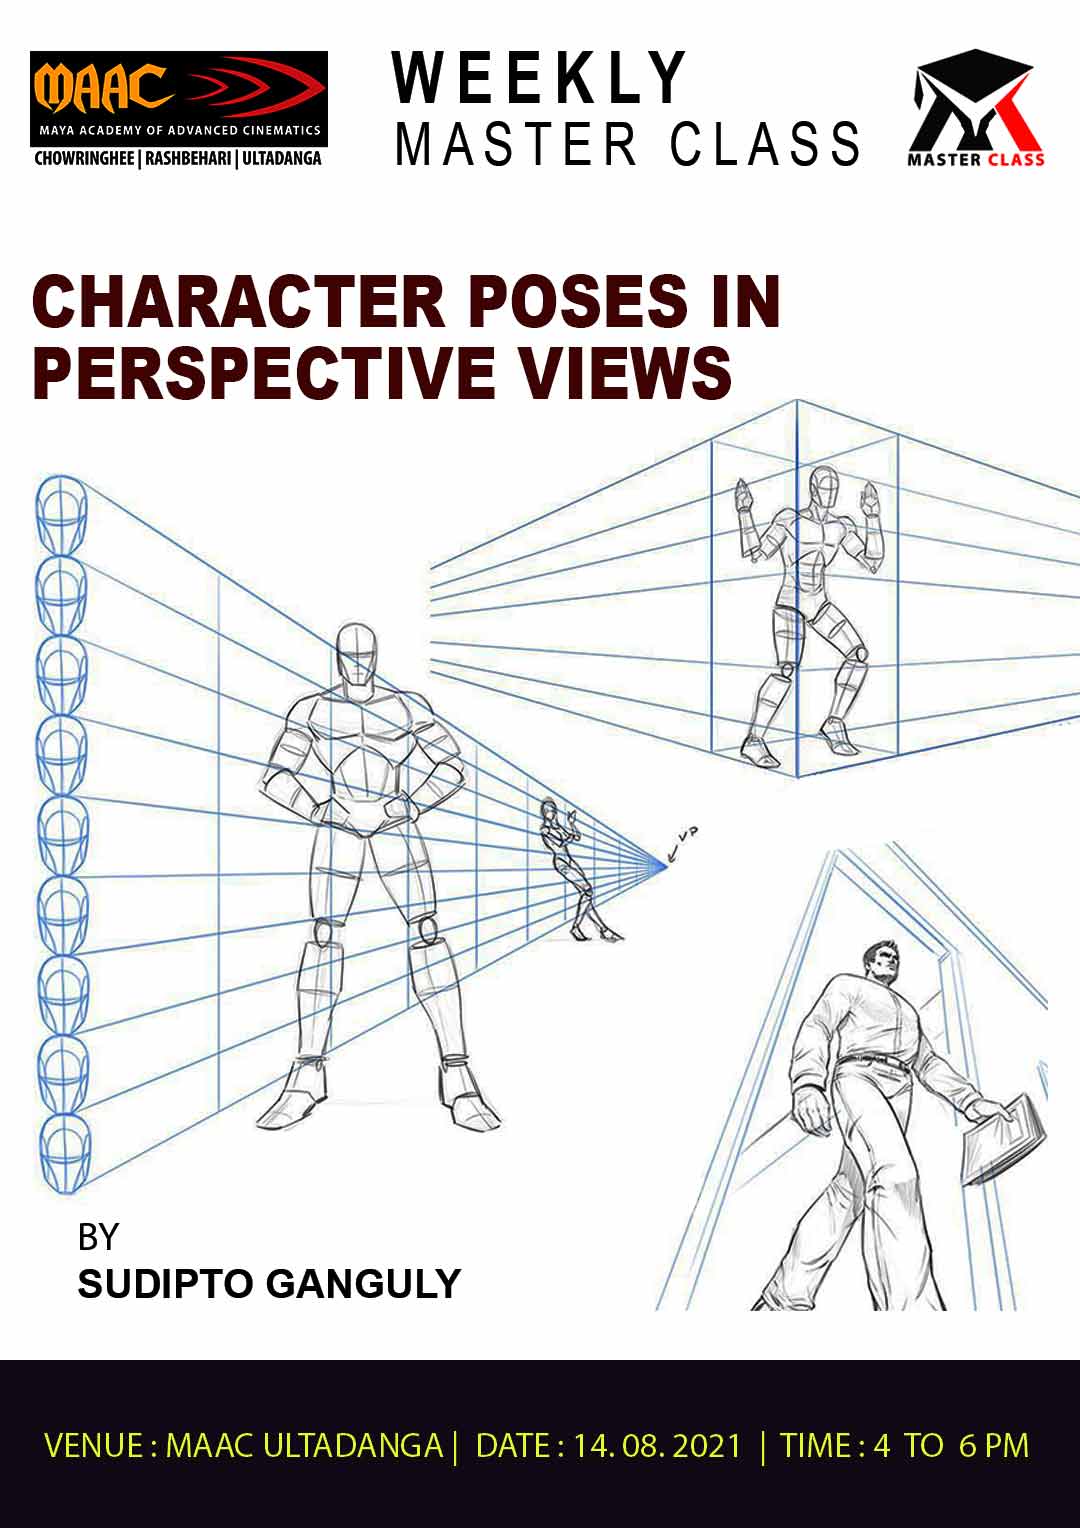 Weekly Master Class on Character Poses in Perspective Views